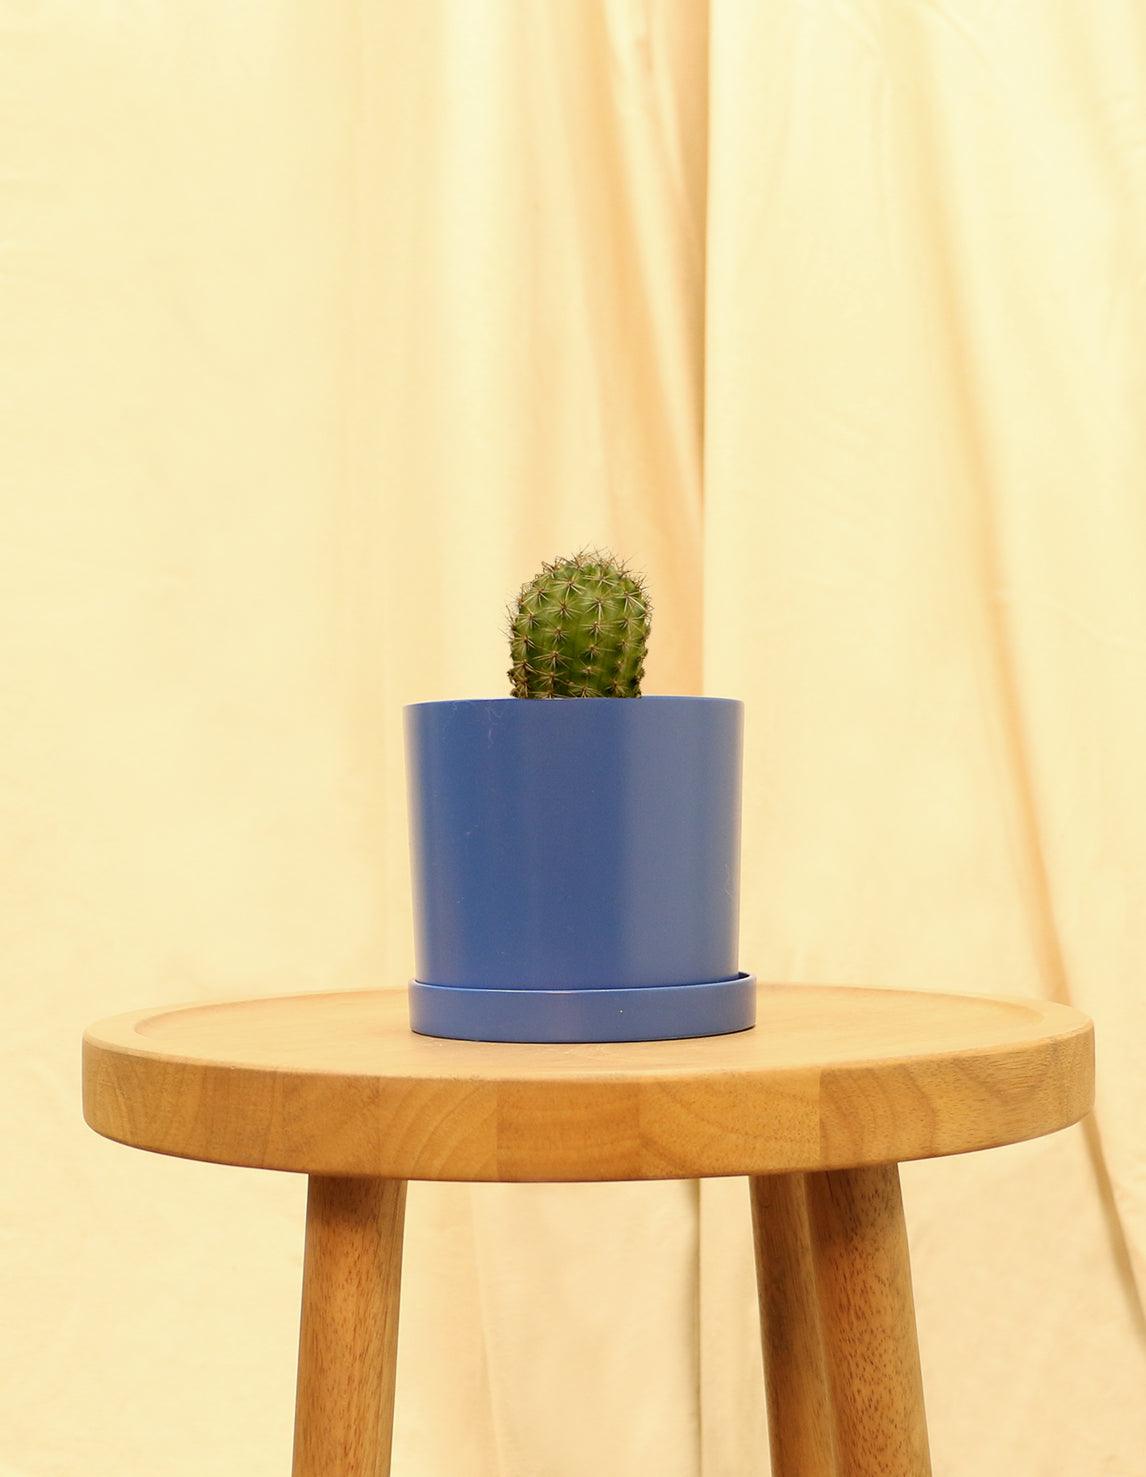 Small Torch Cactus in blue pot.